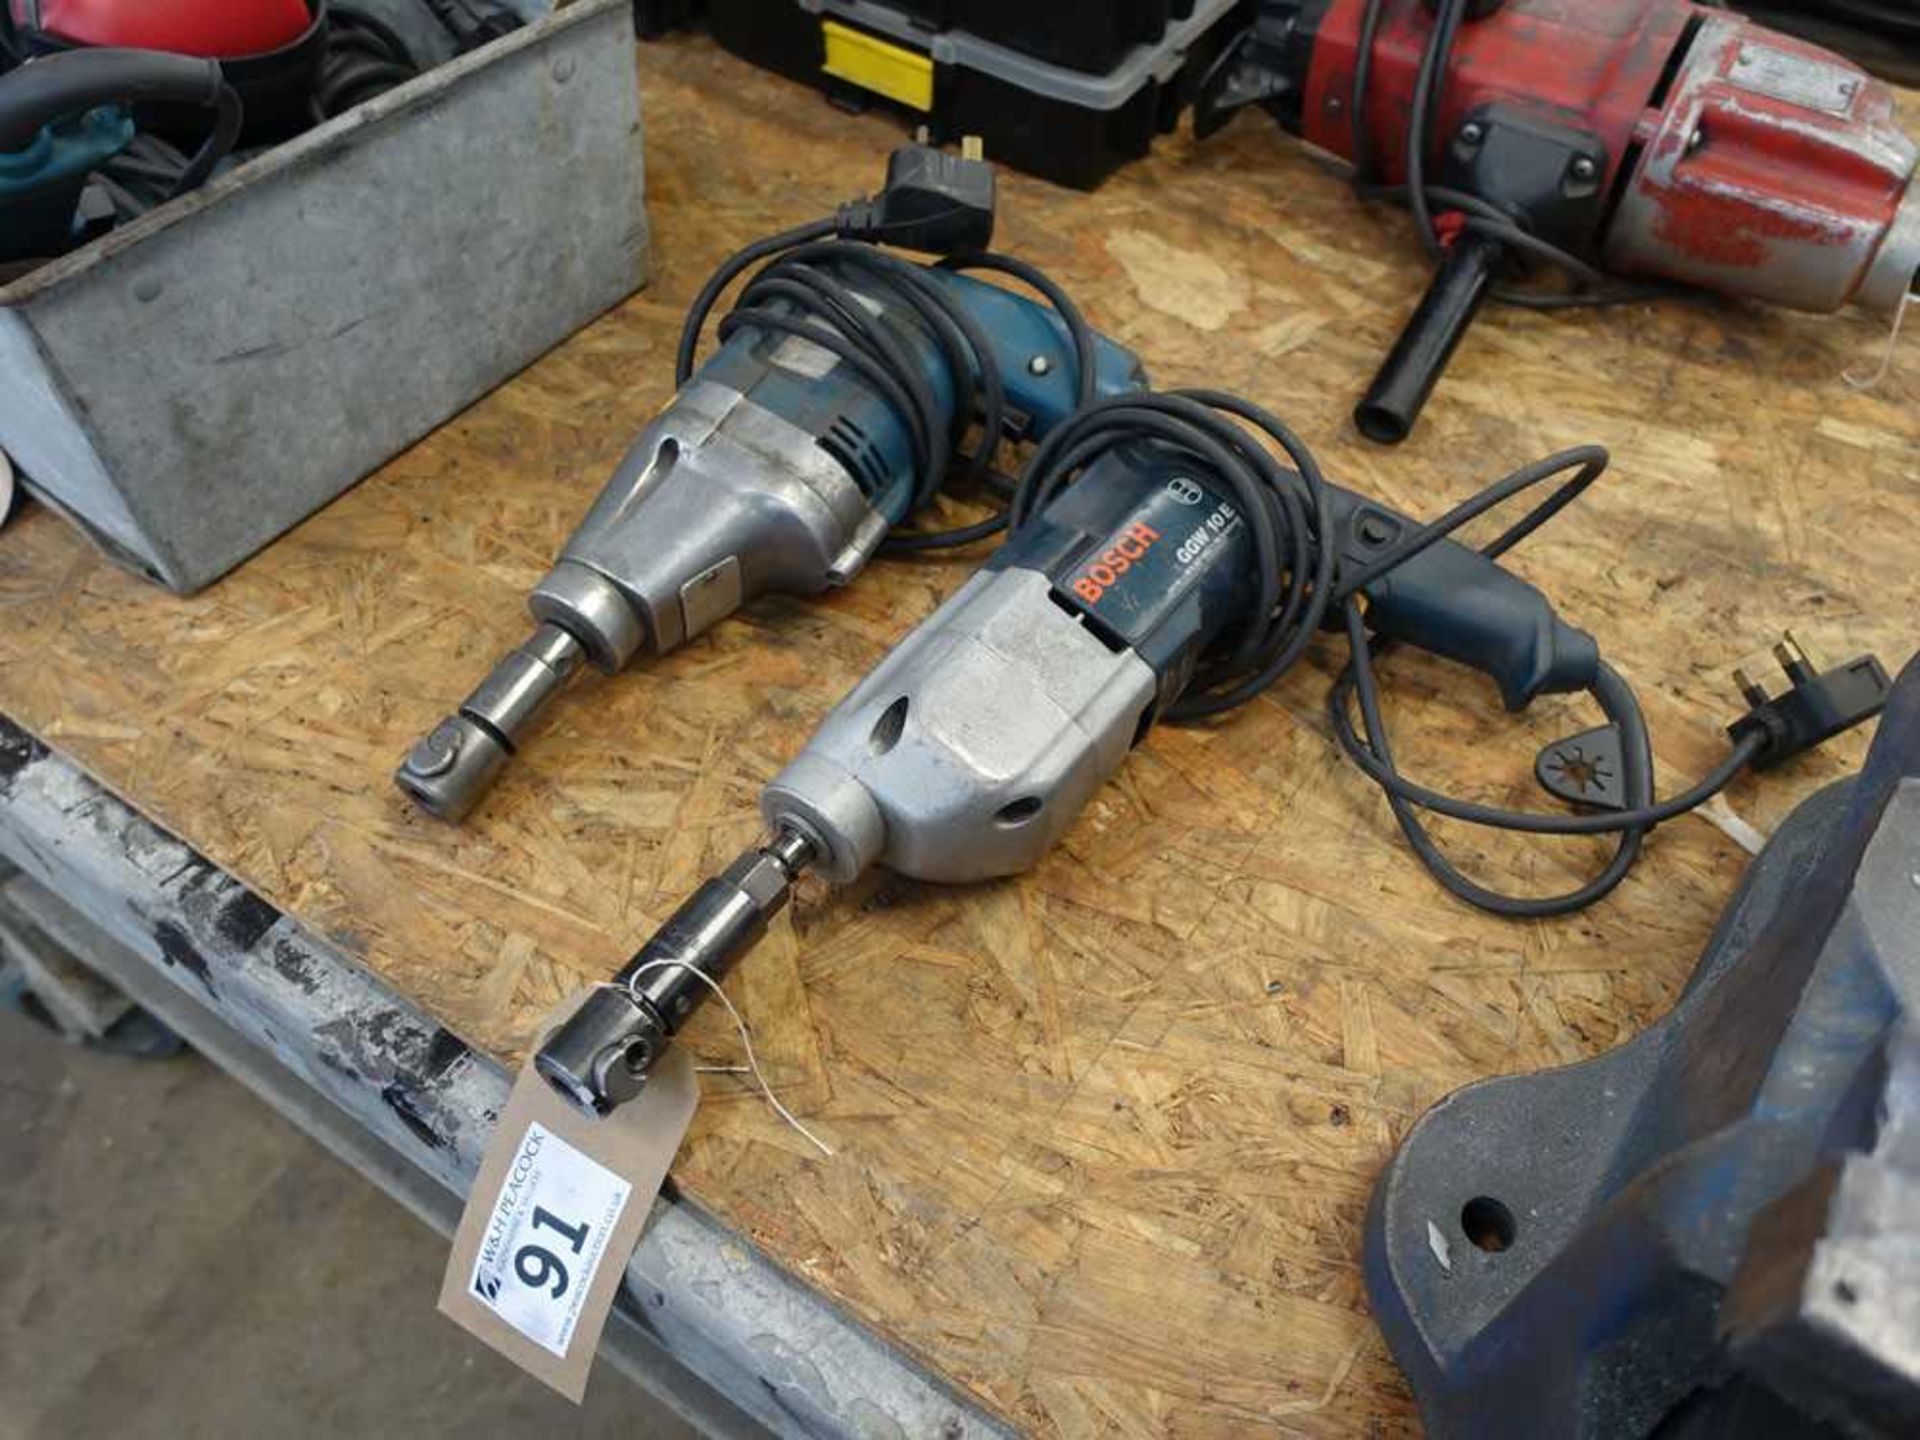 +VAT Bosch GGW10E thread tapping drill, single phase plus one other